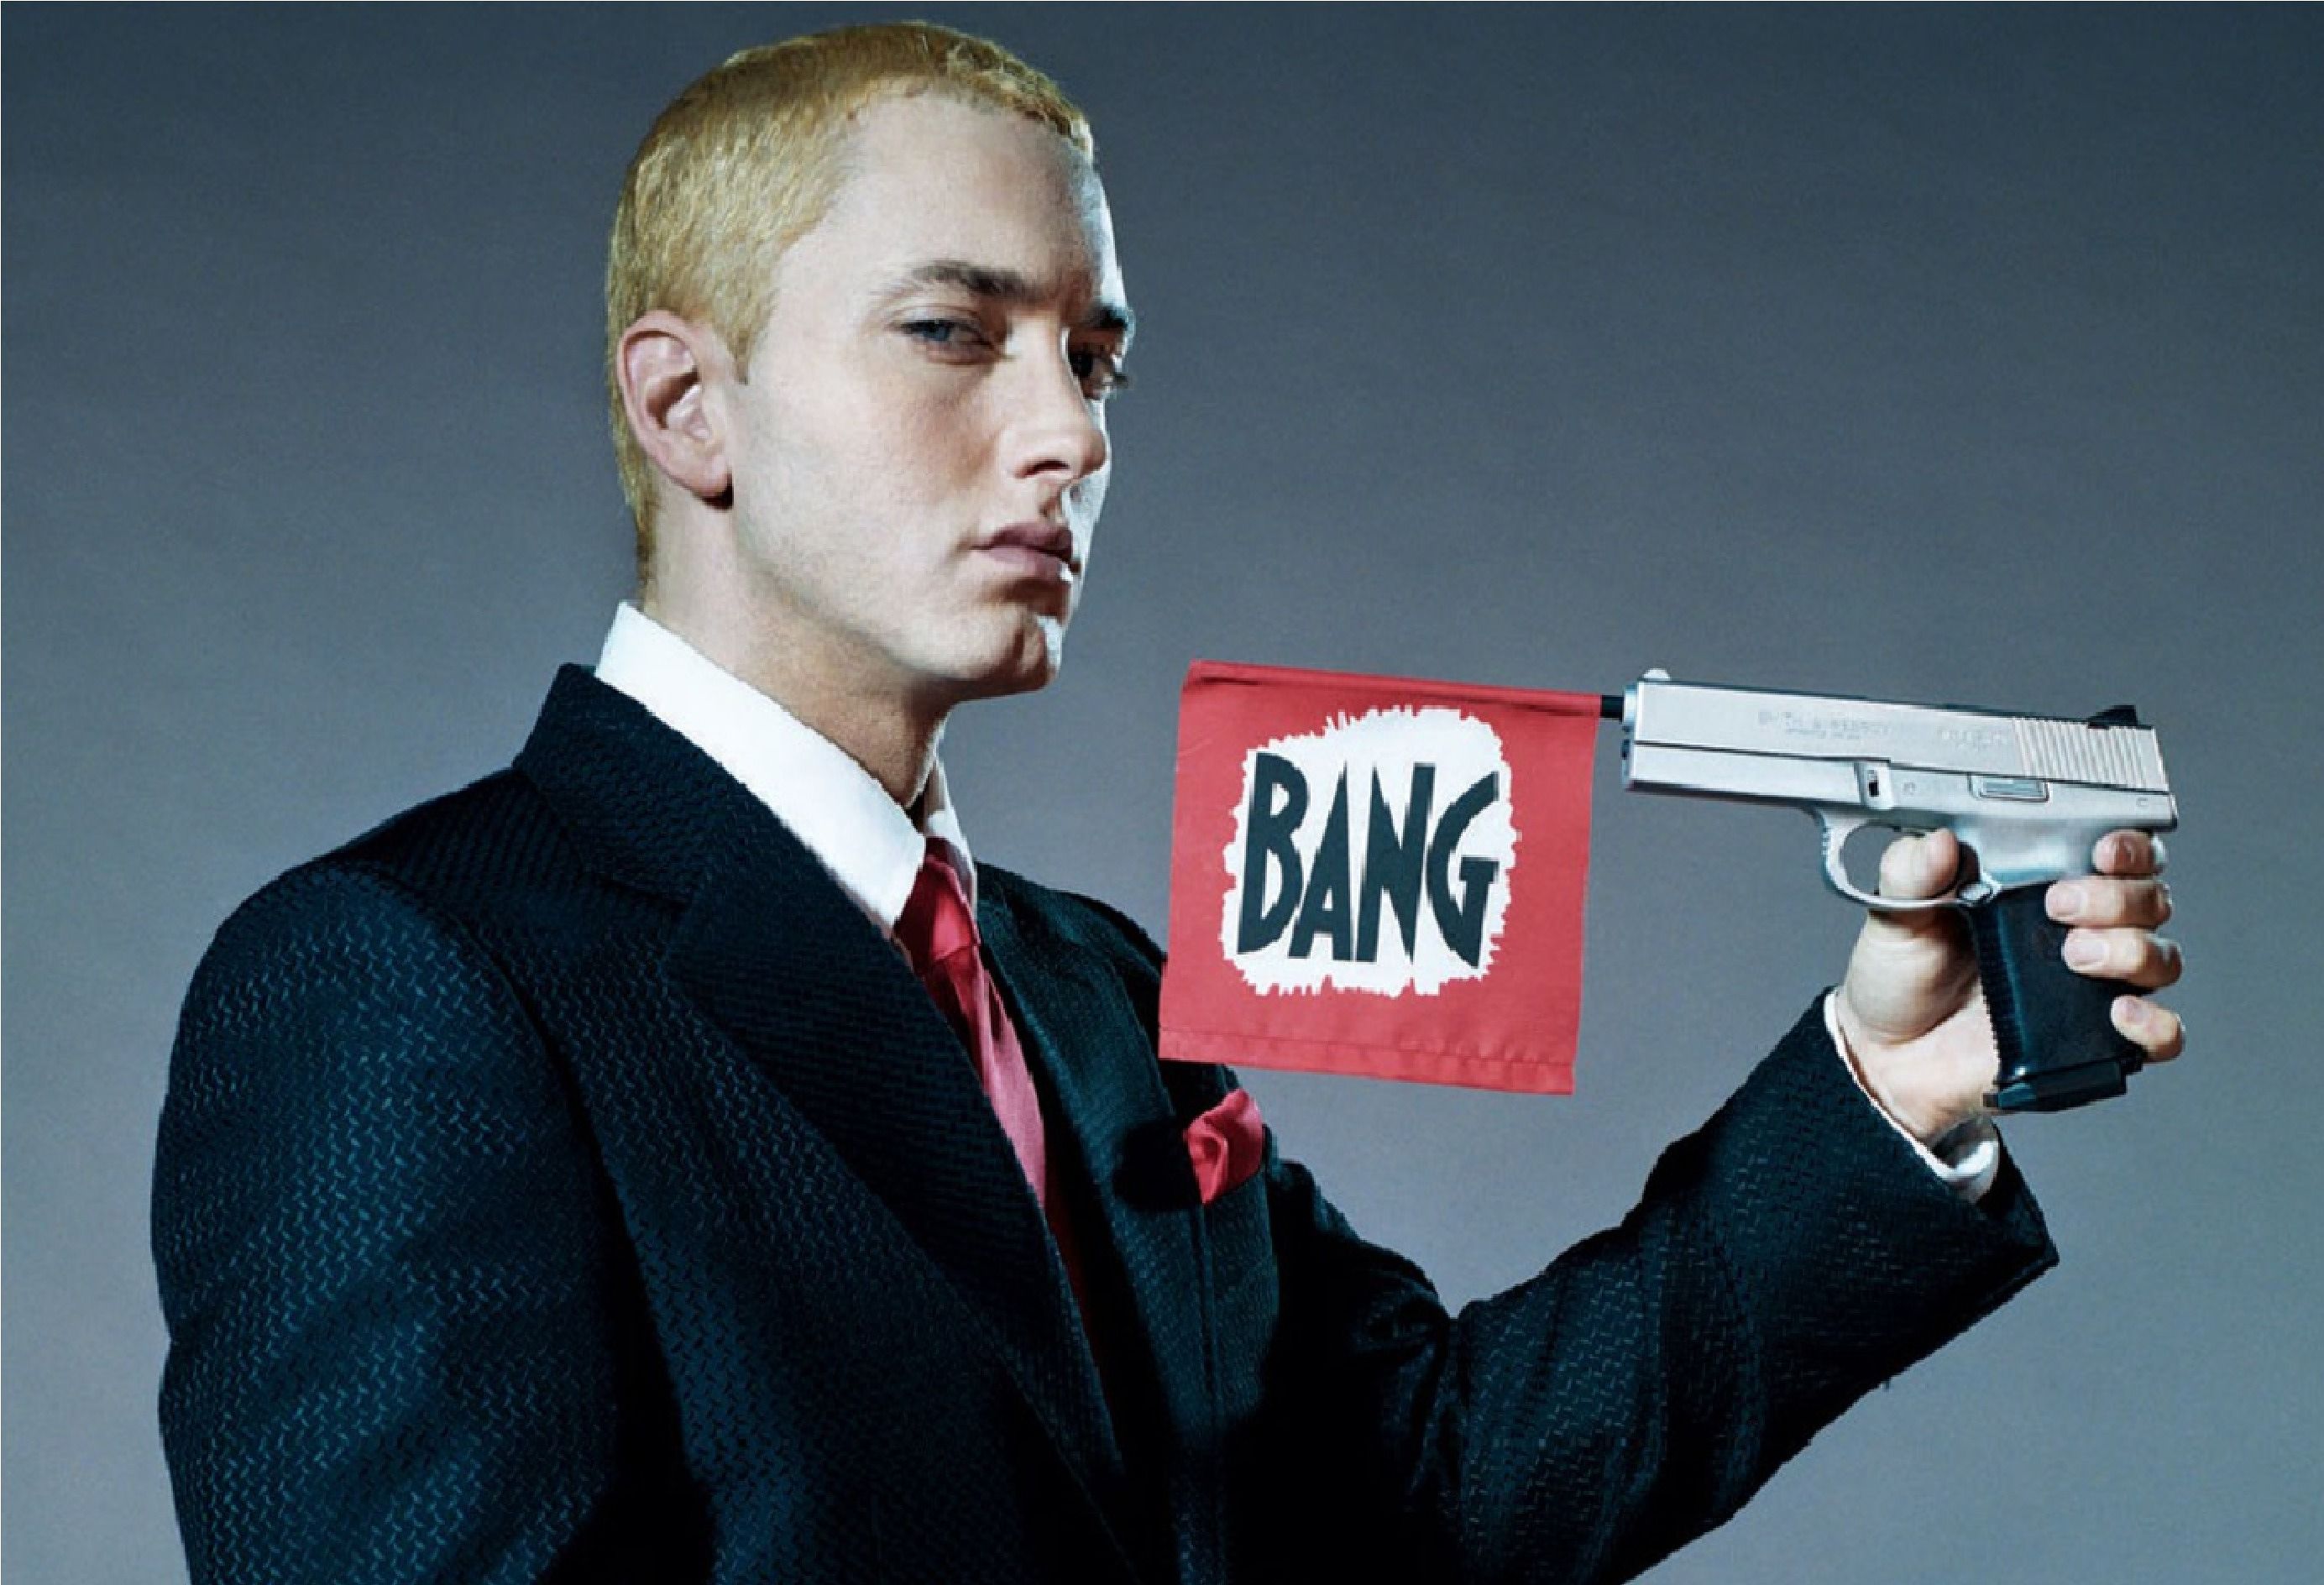 Download Eminem Wallpaper HD Free for Android - Eminem Wallpaper HD APK  Download - STEPrimo.com